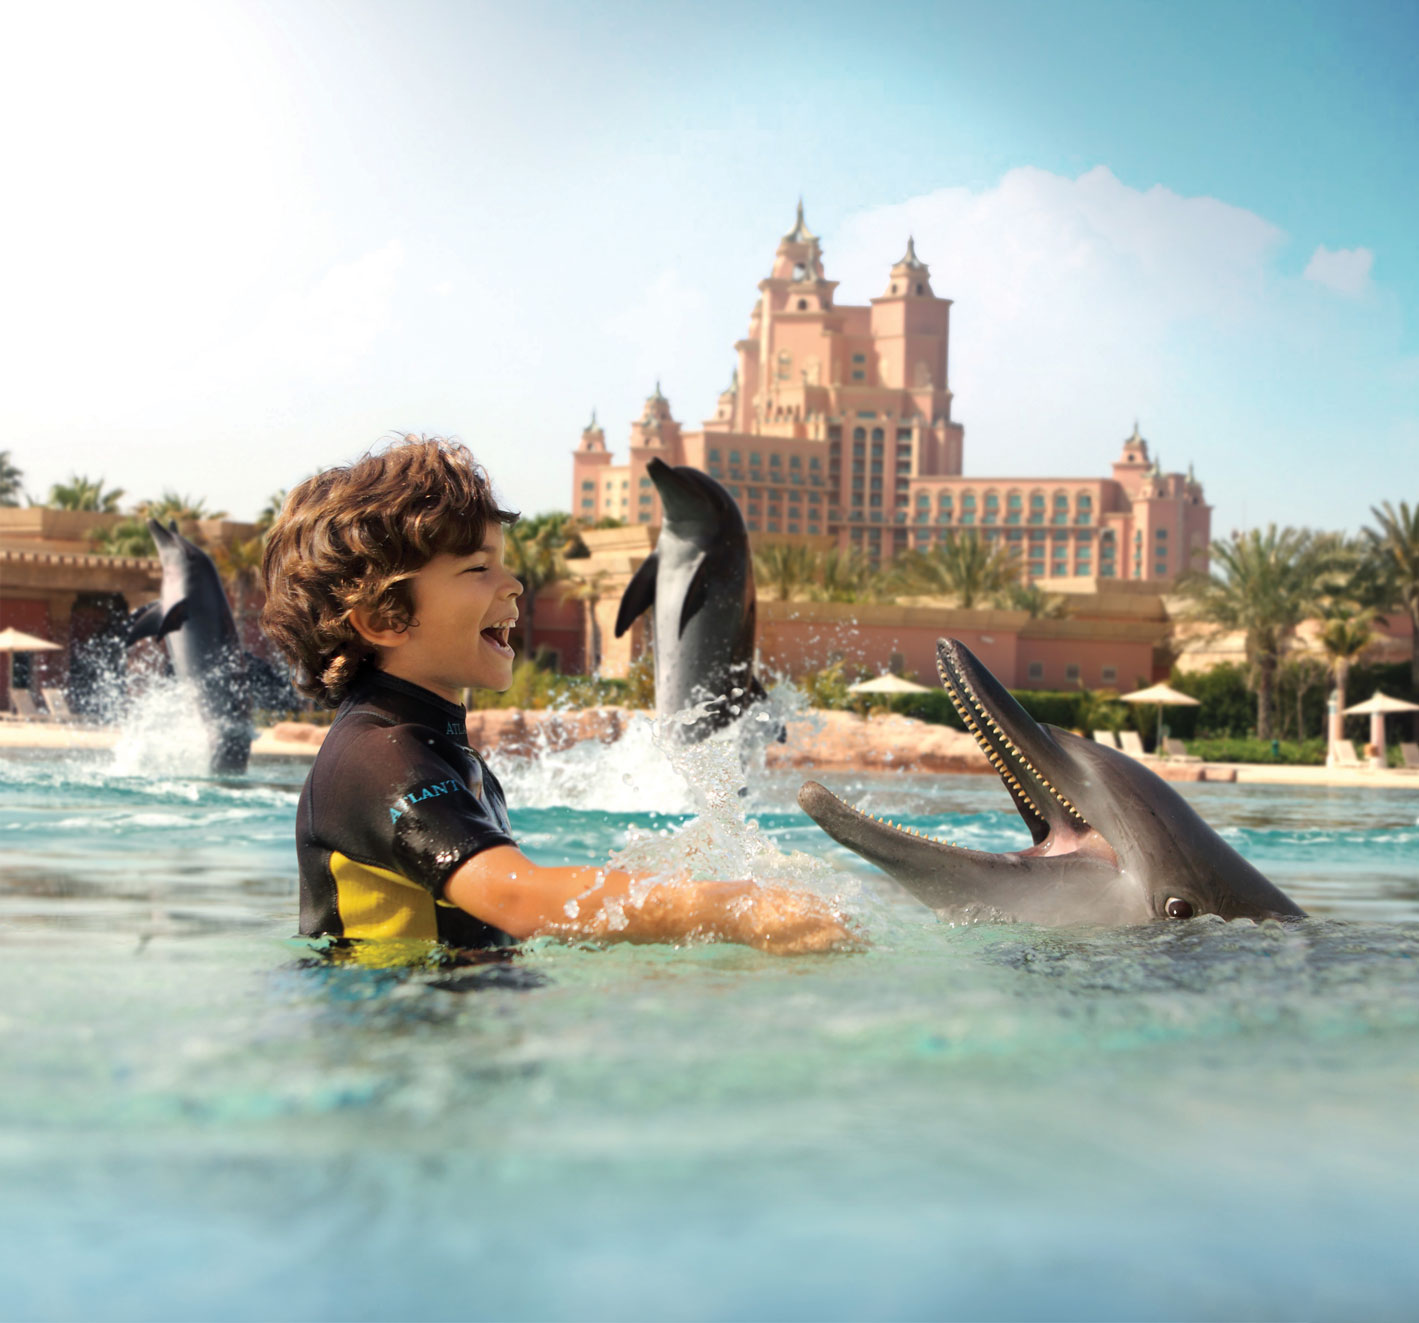 Swimming with Dolphins – Dolphin Bay Atlantis(DOLPHIN ENCOUNTER)